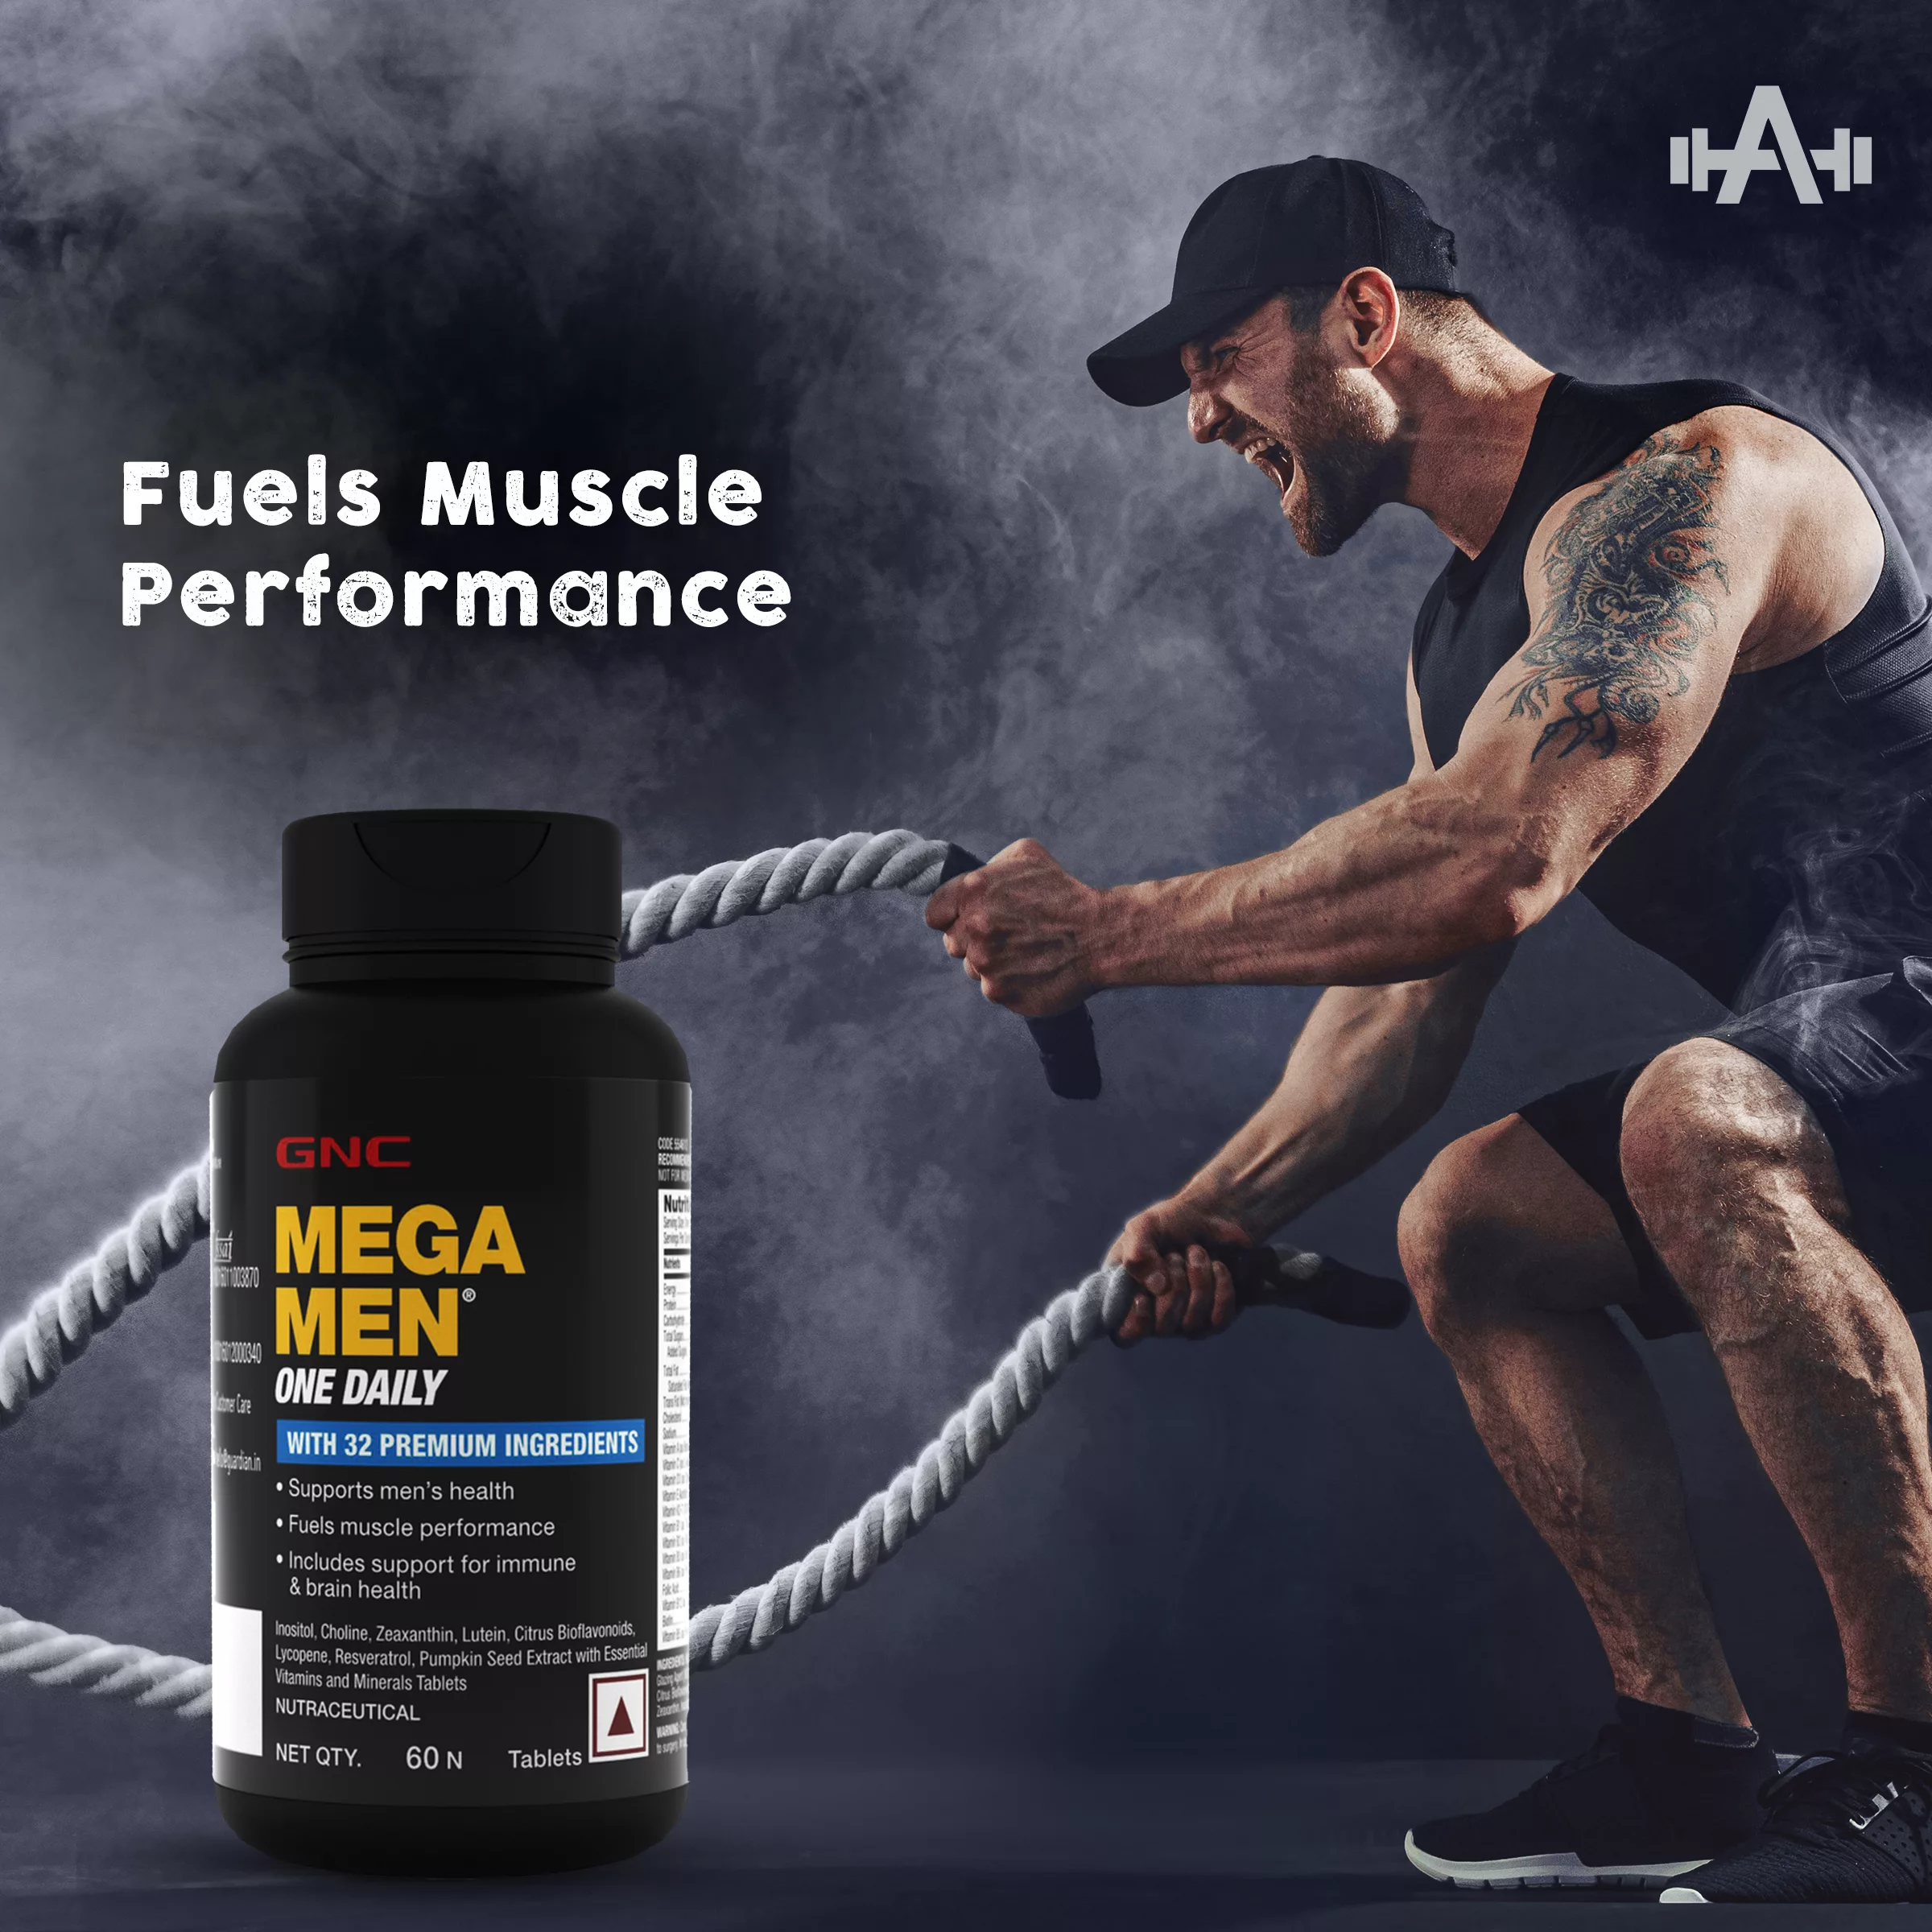 Fuels Muscle Performance